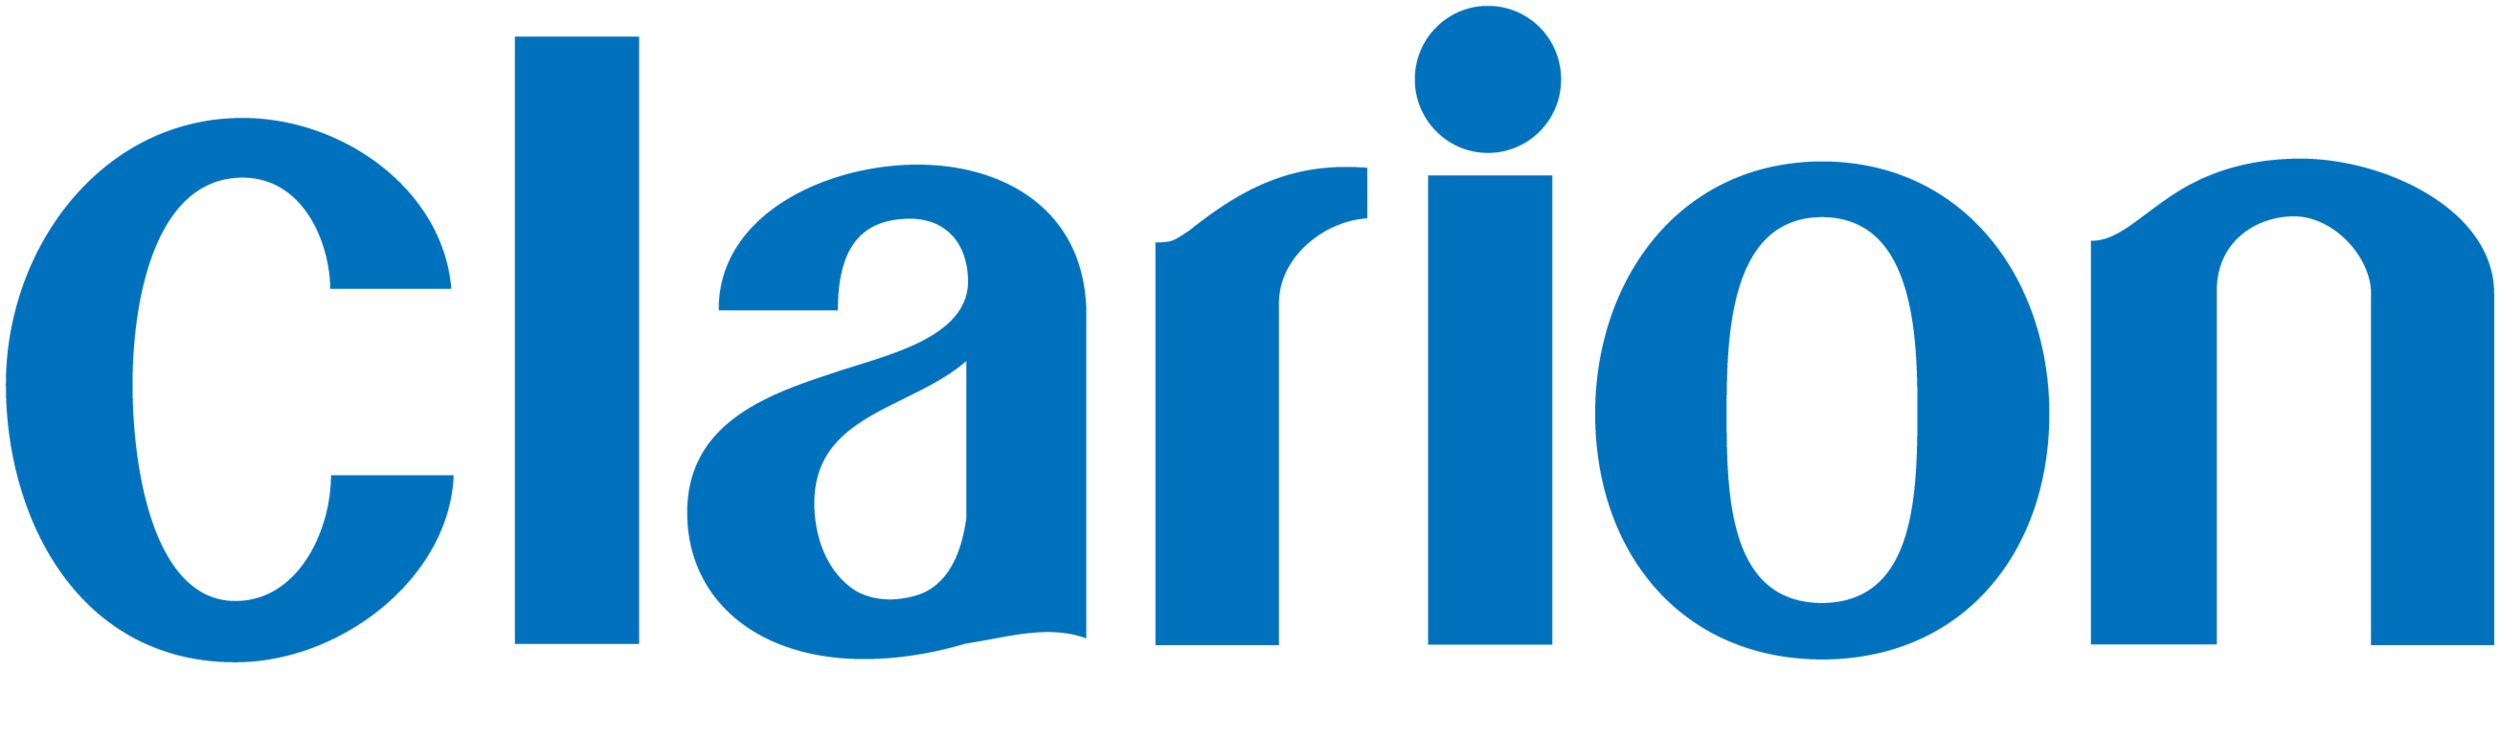 clarion-vector-logo.png